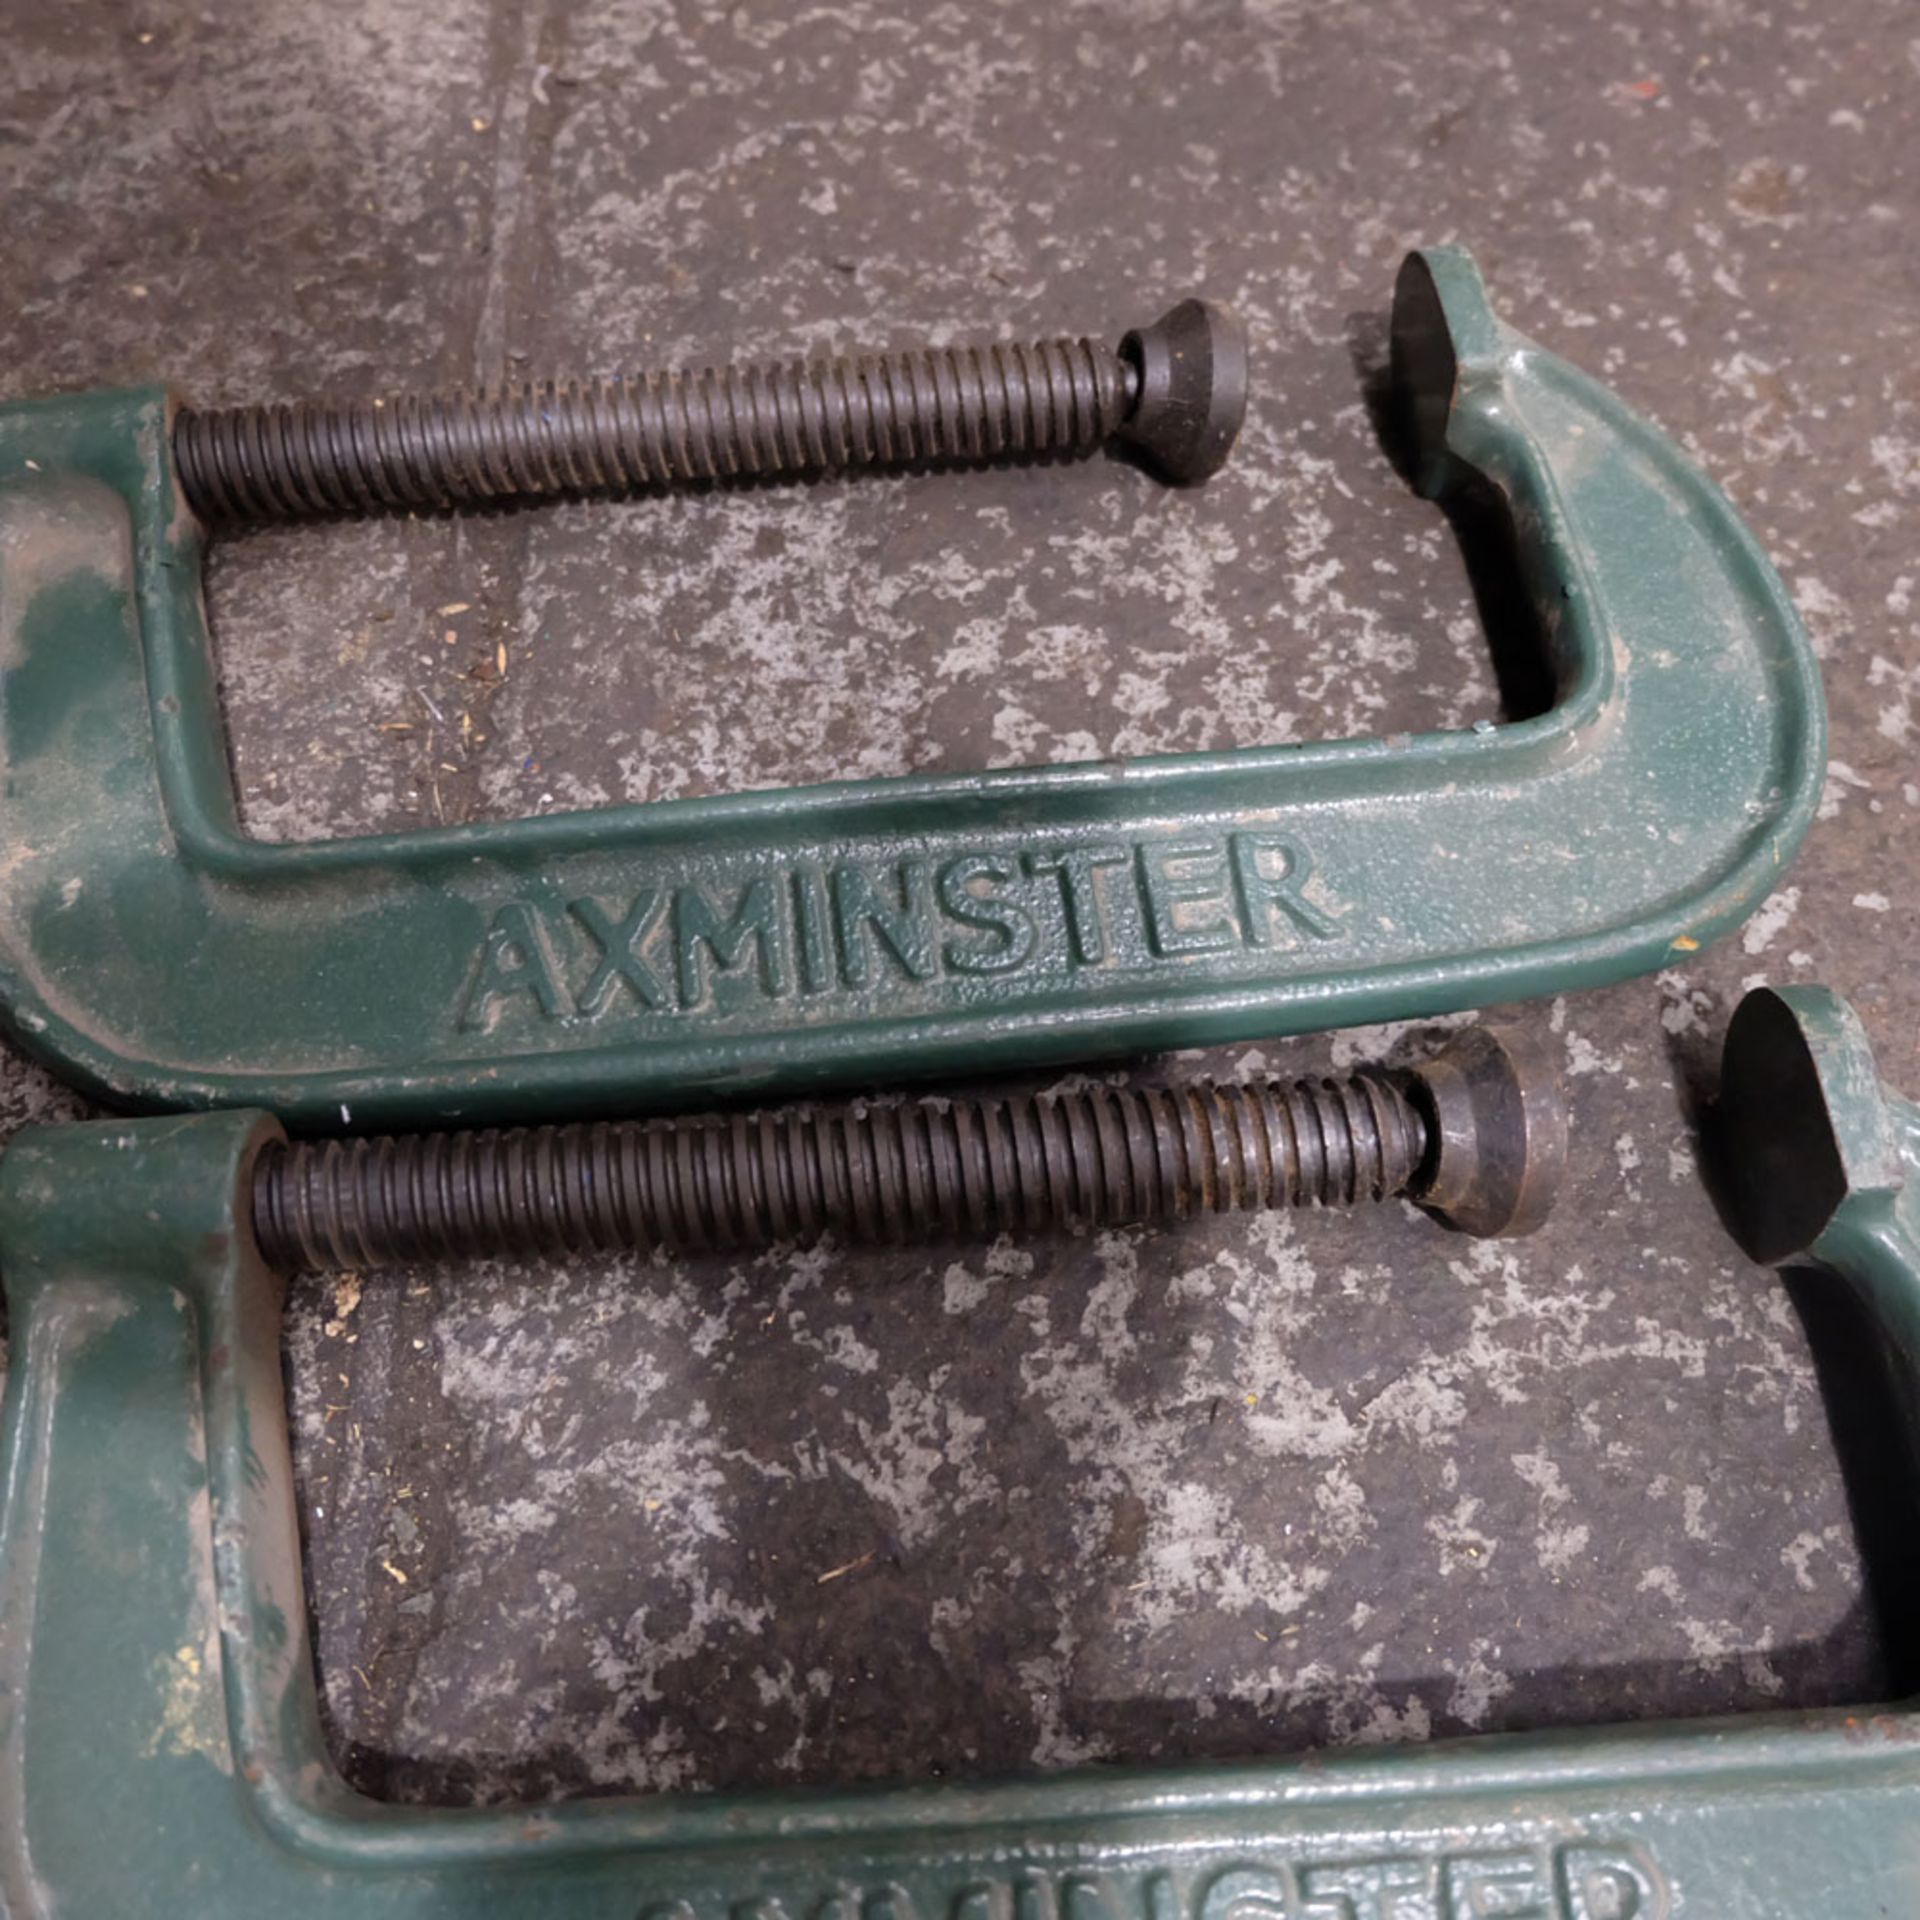 3 x Axminster 8" G Clamps - Image 2 of 2